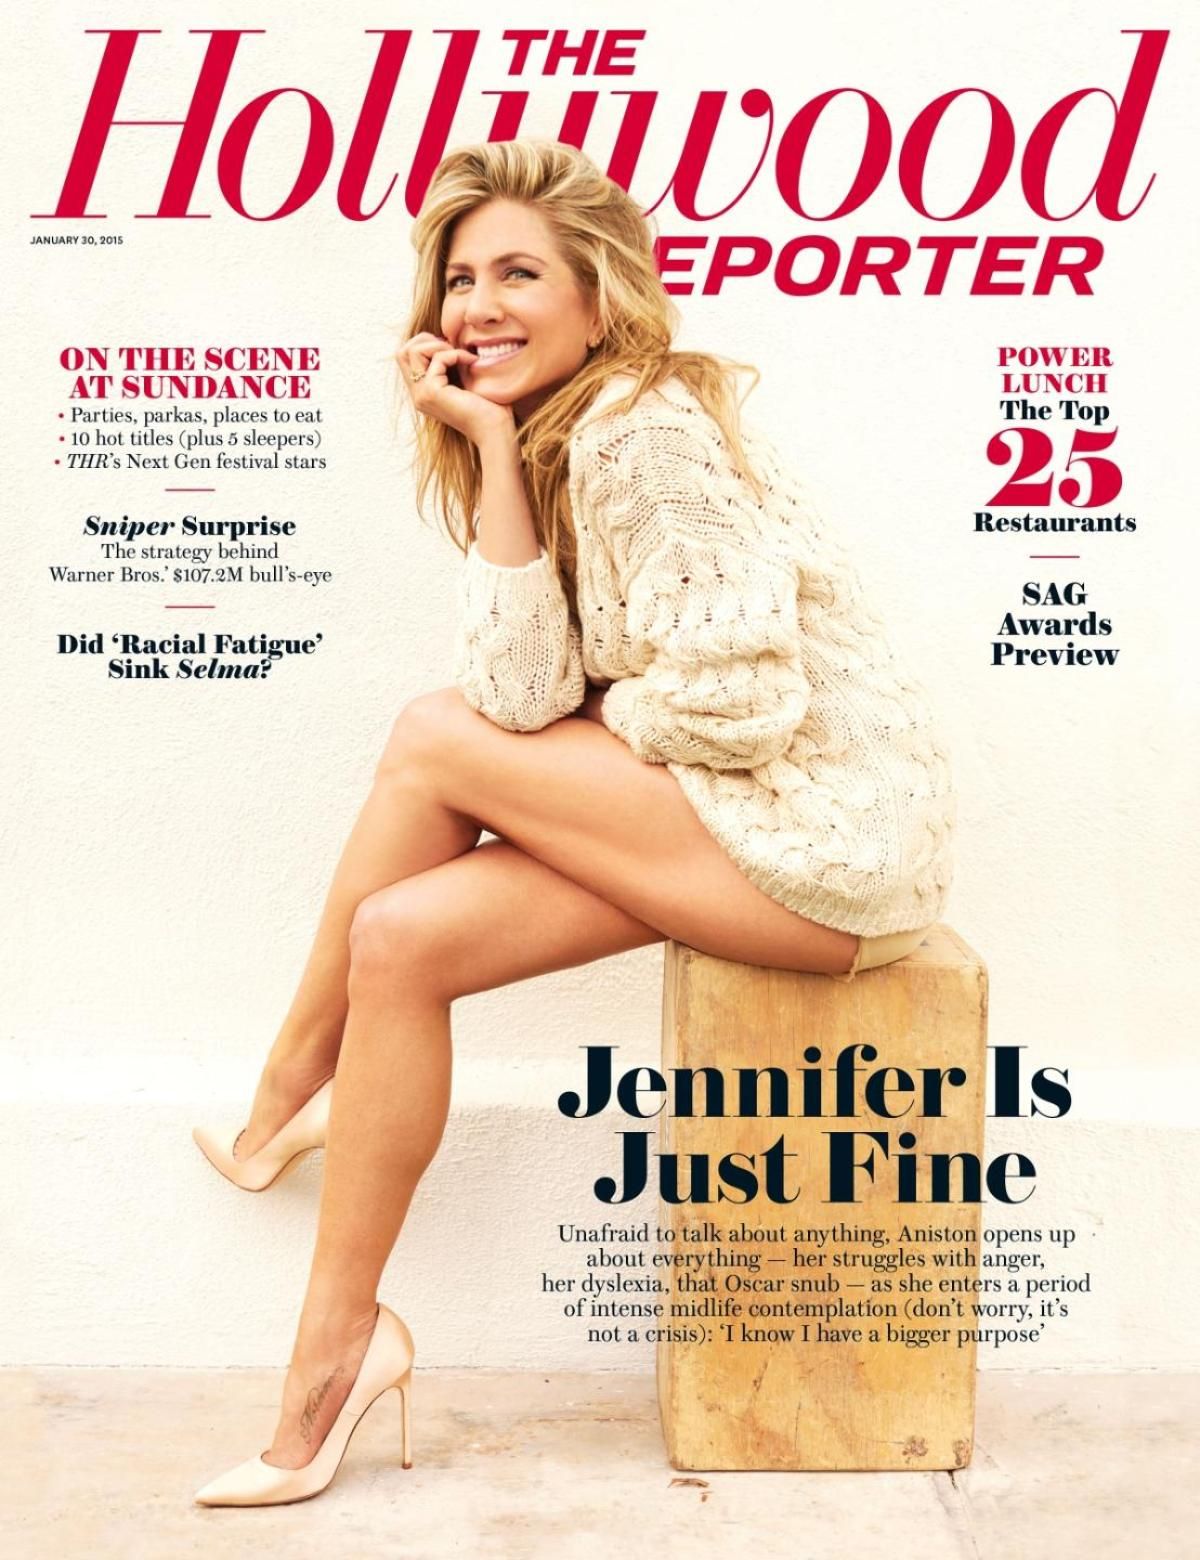 jennifer aniston Photoshoot For The Hollywood Reporter